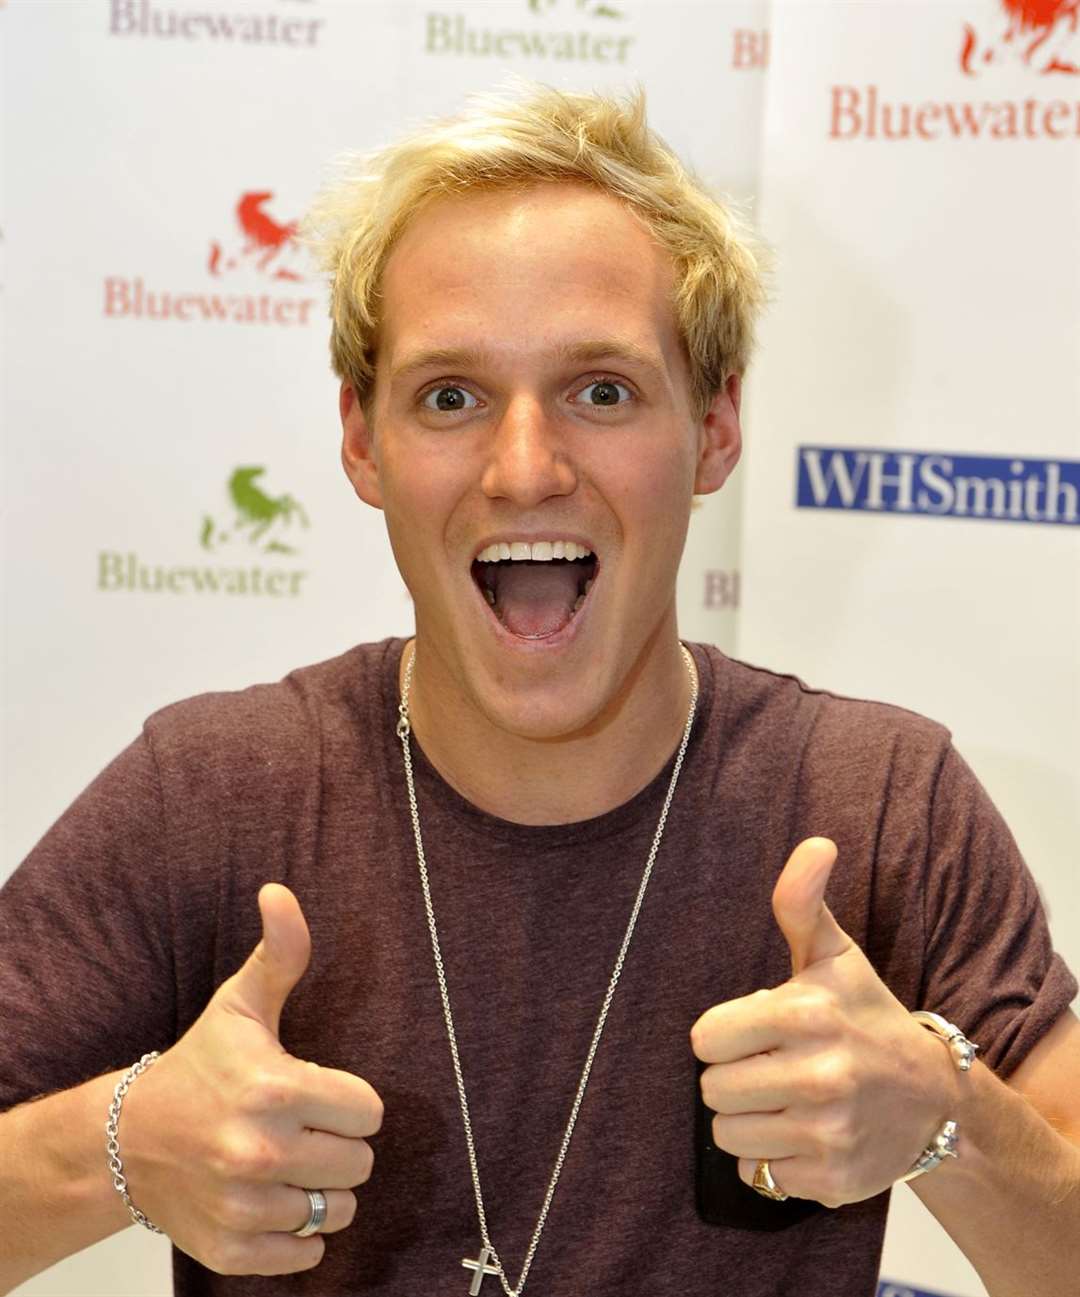 Jamie Laing at WH Smiths